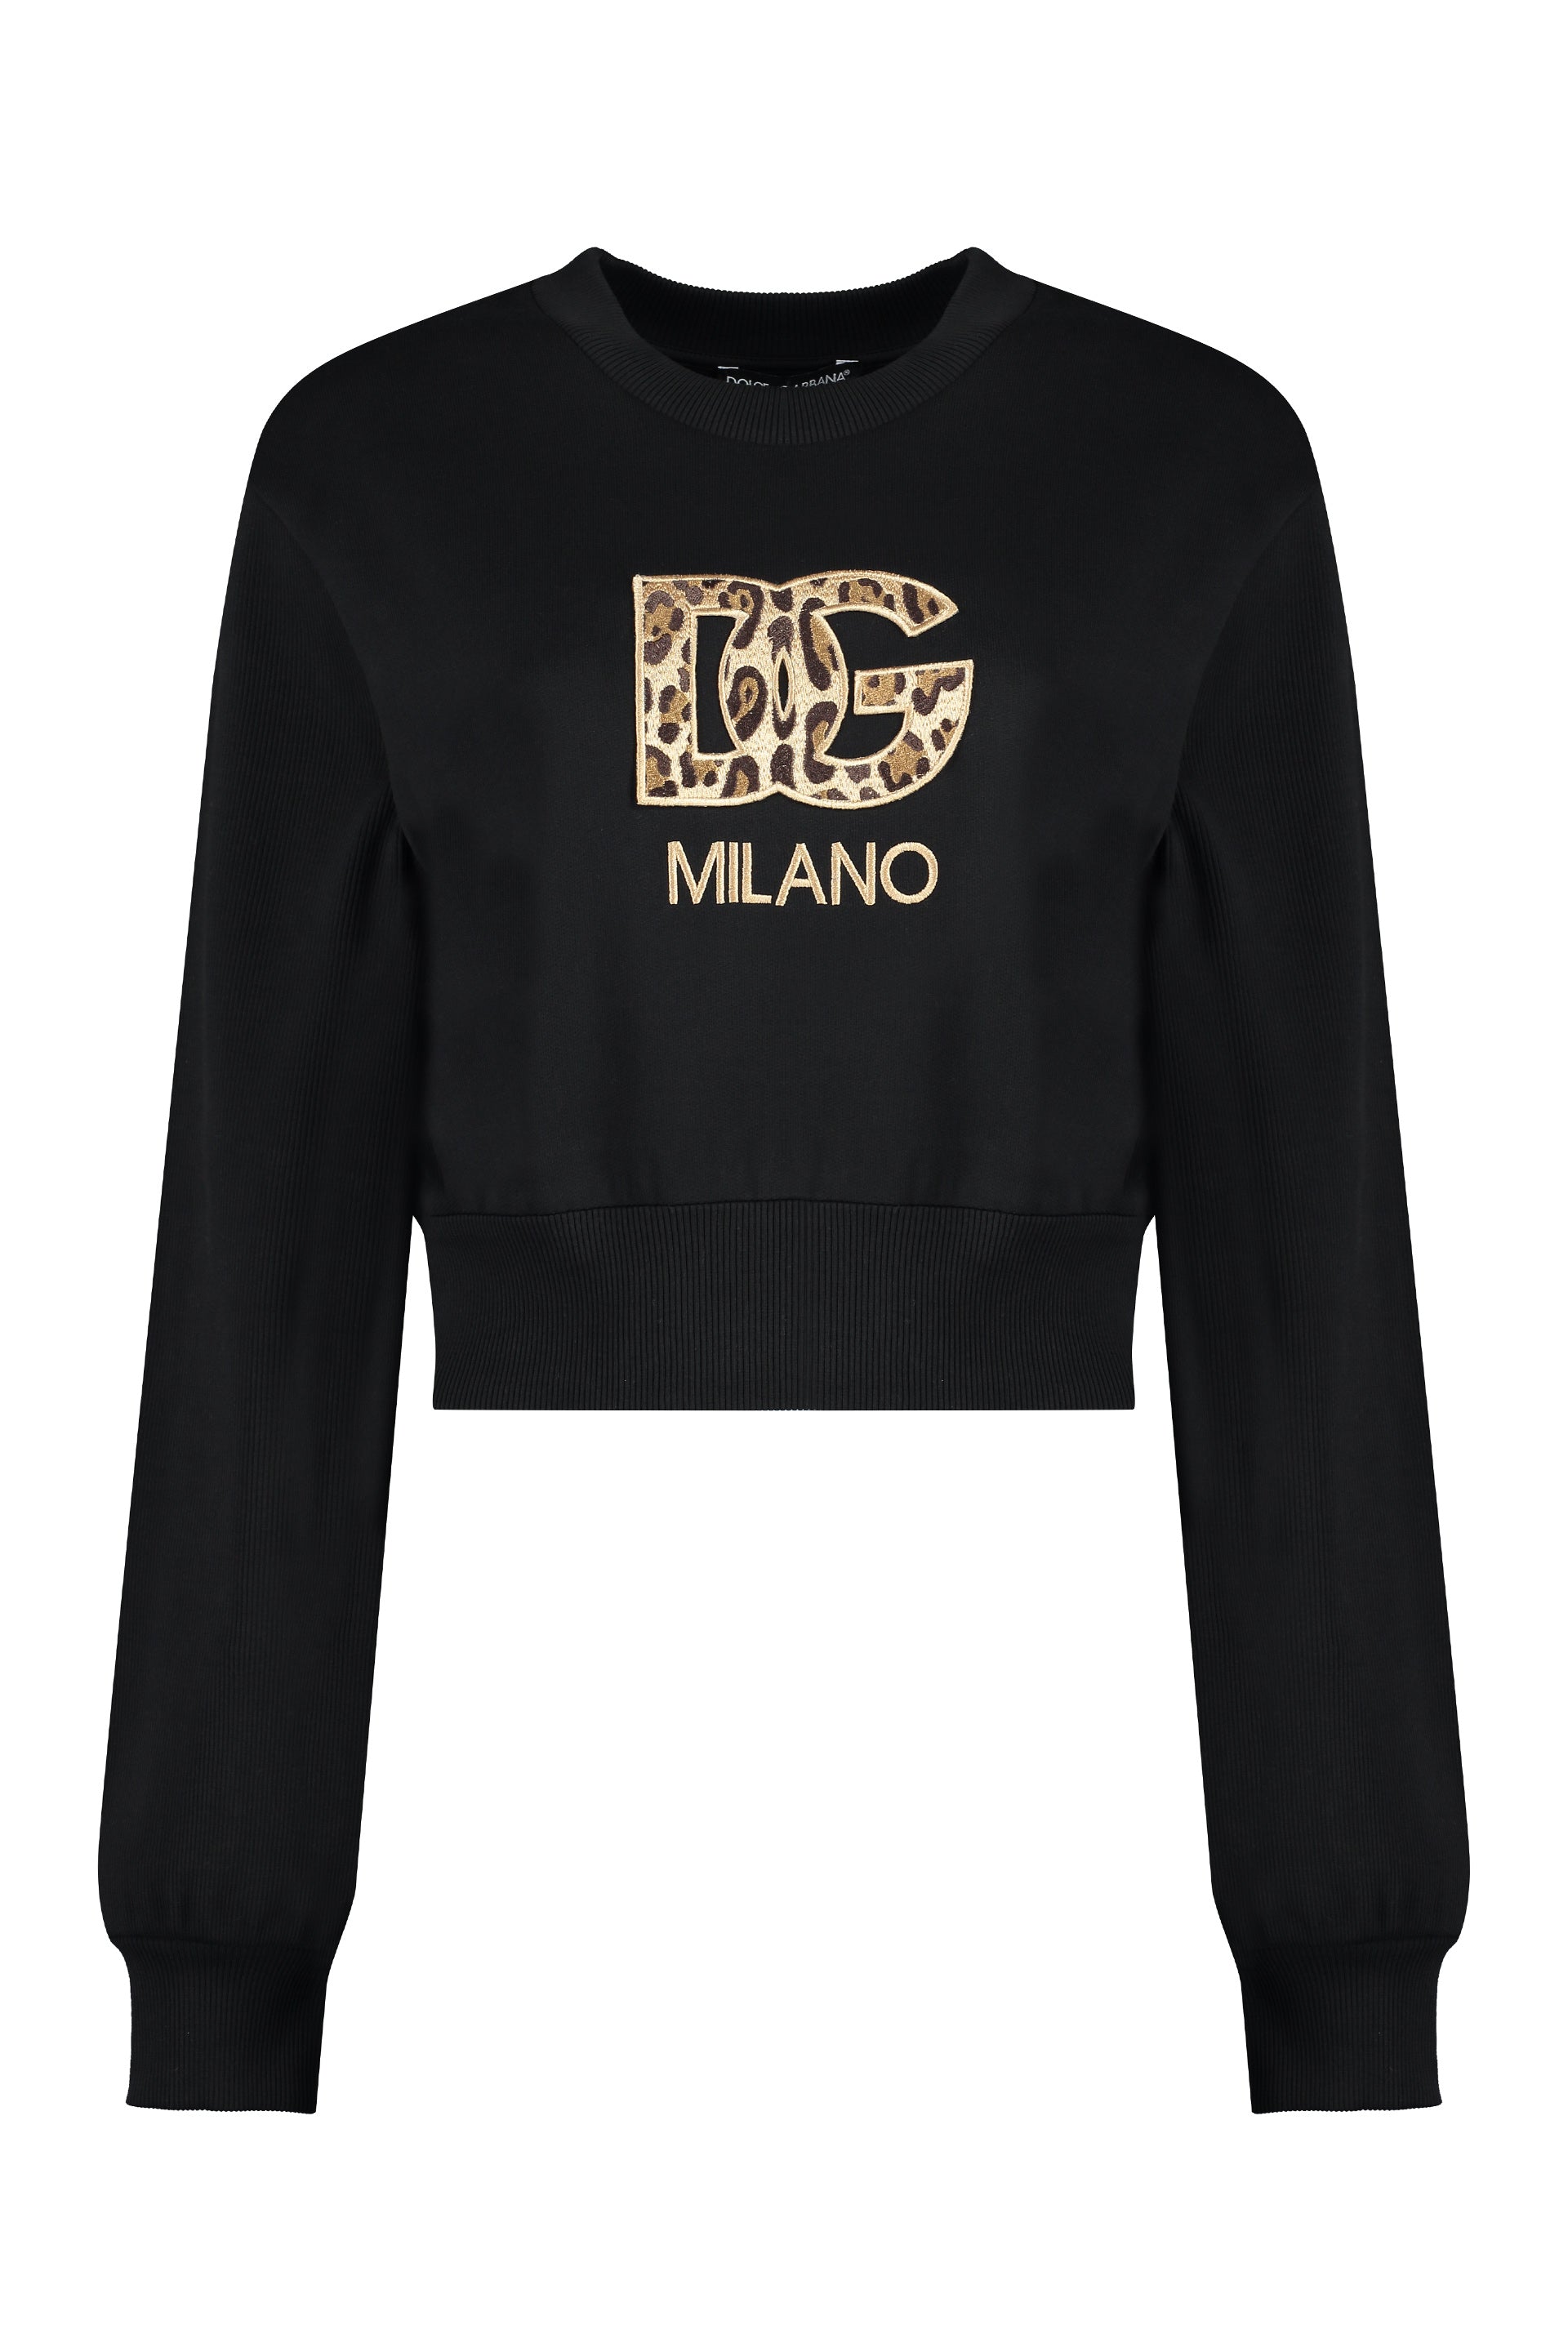 Shop Dolce & Gabbana Black Cotton Sweatshirt With Logo Detail And Cropped Length For Women